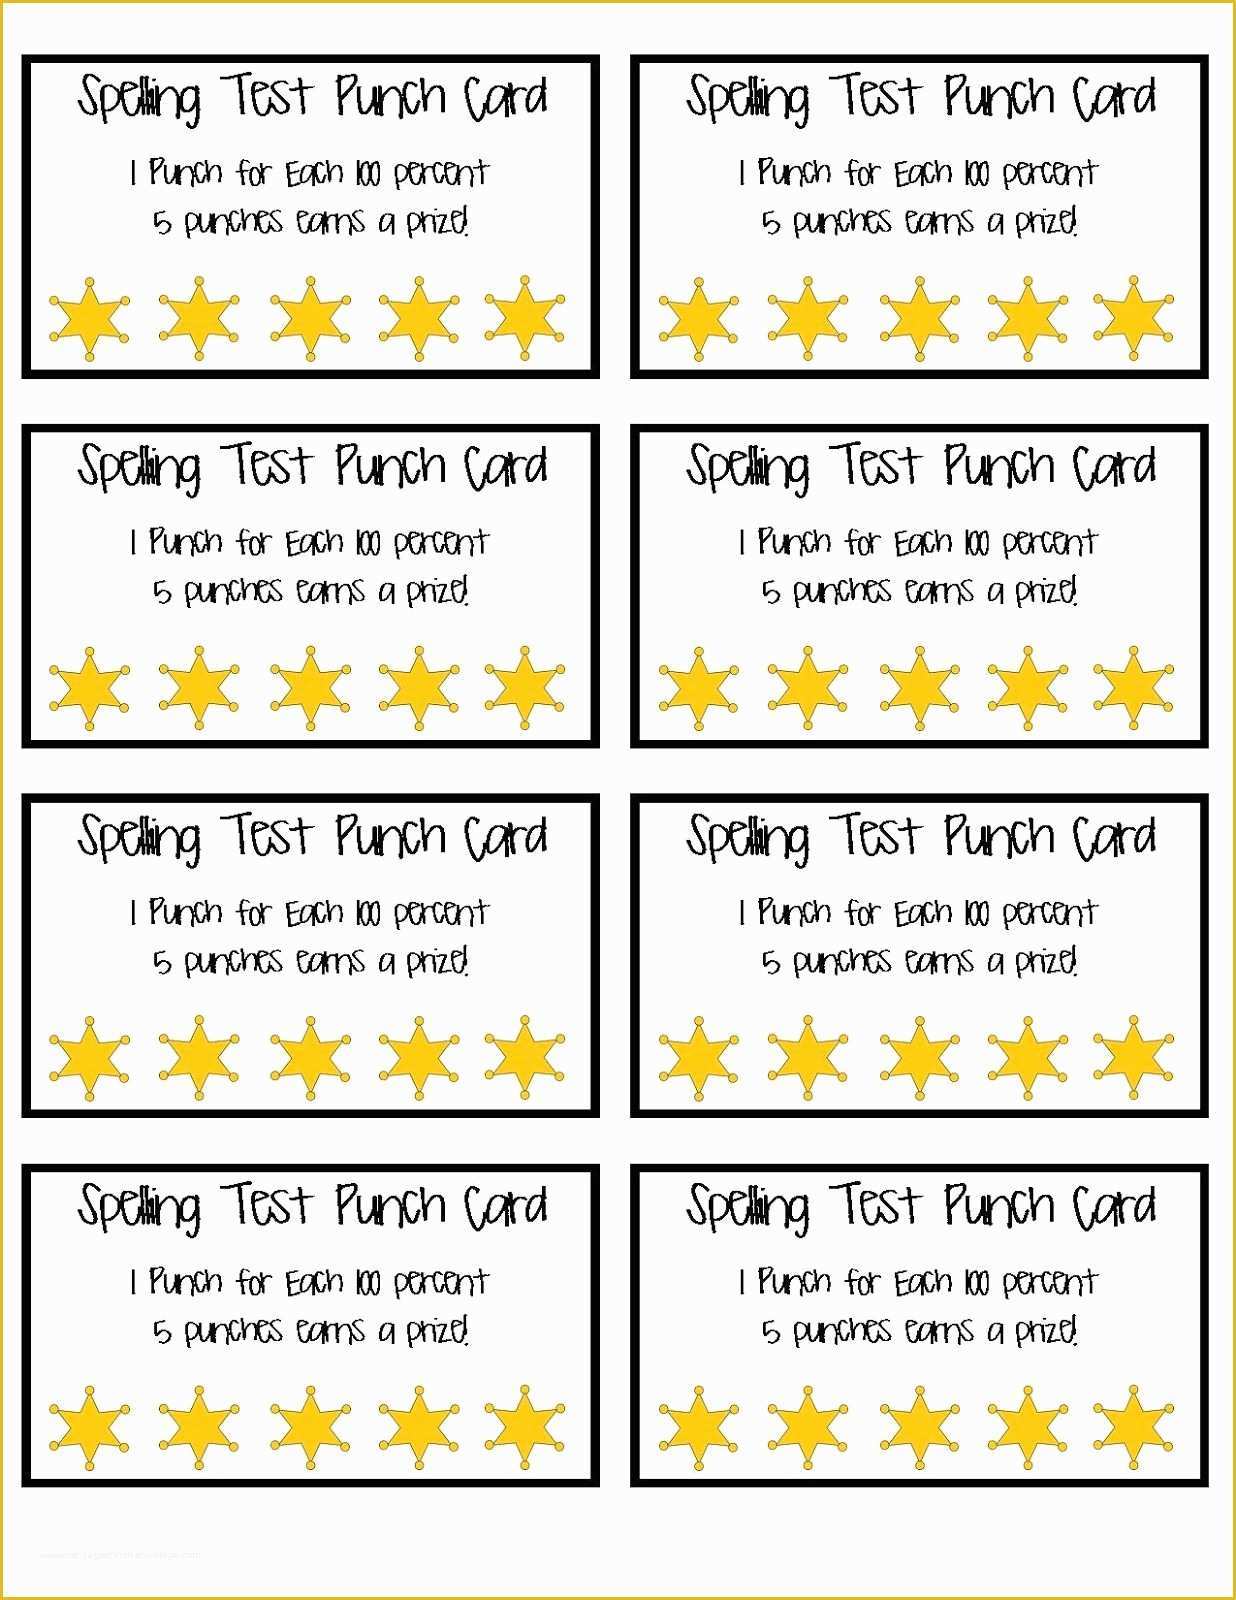 Free Printable Punch Card Template Of Spelling Test Punch Cards Part Of A Set Of 8